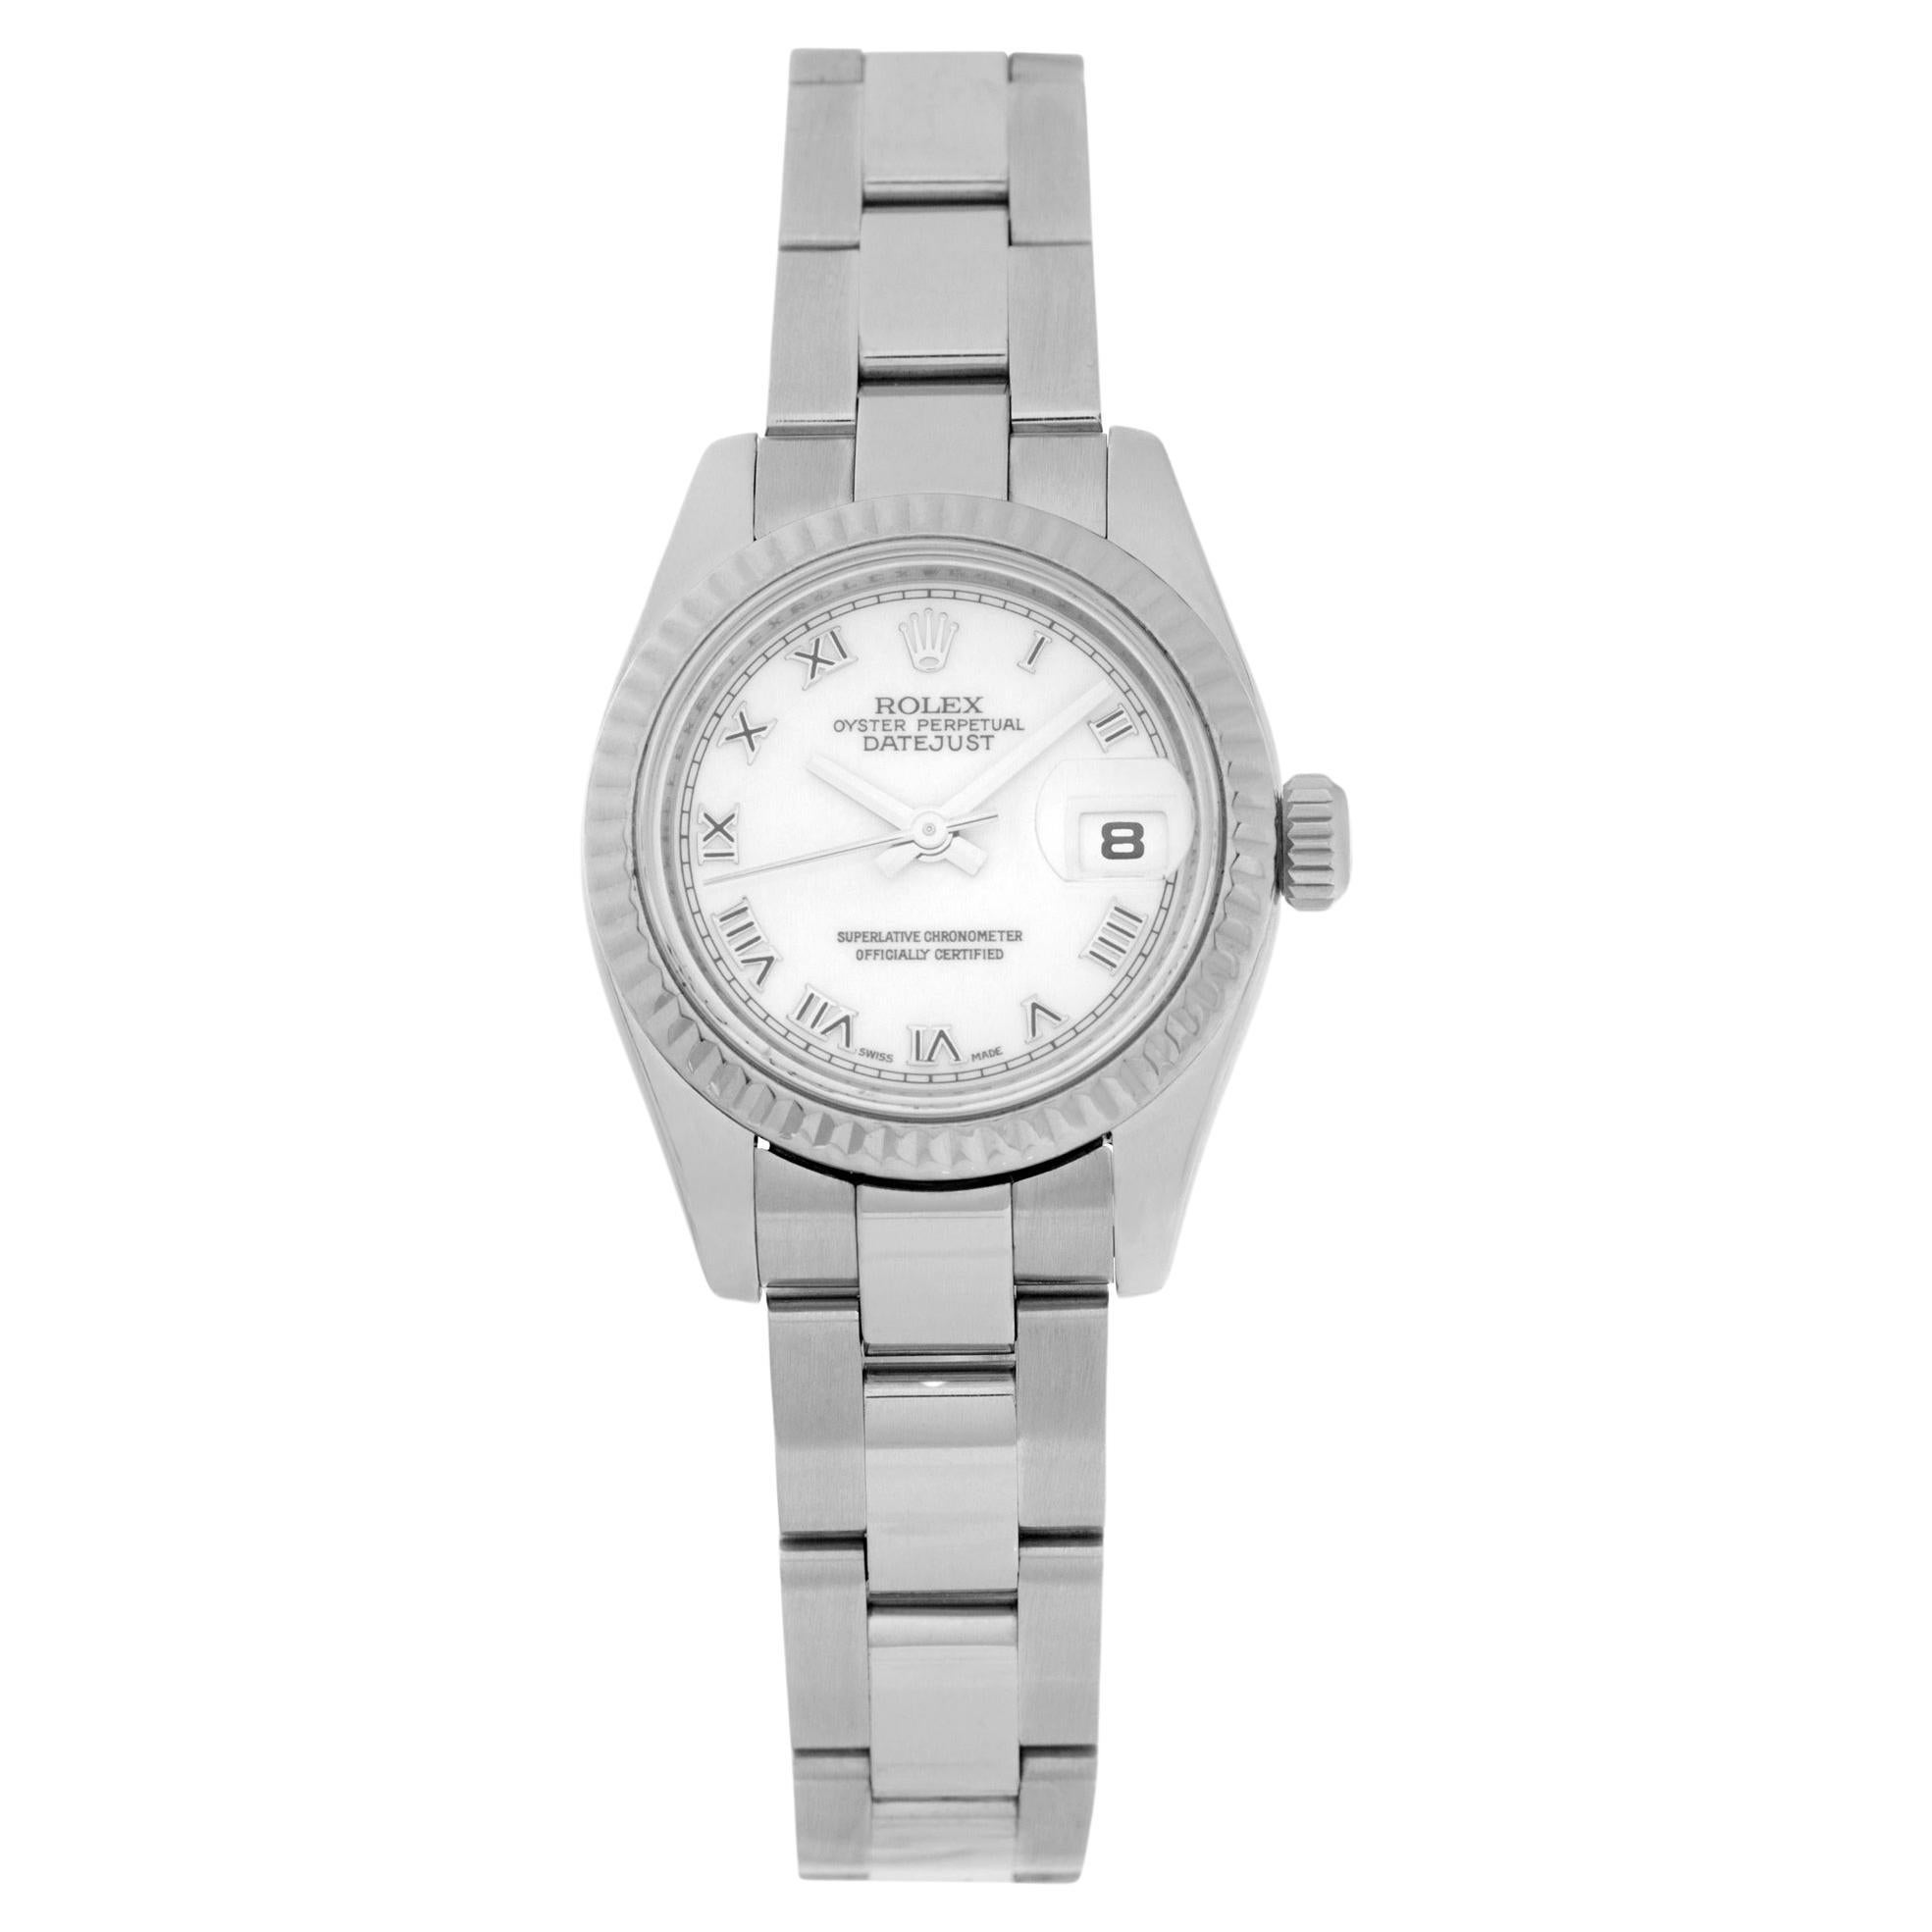 Rolex Datejust Stainless Steel White Roman Dial Ref. 179174 For Sale